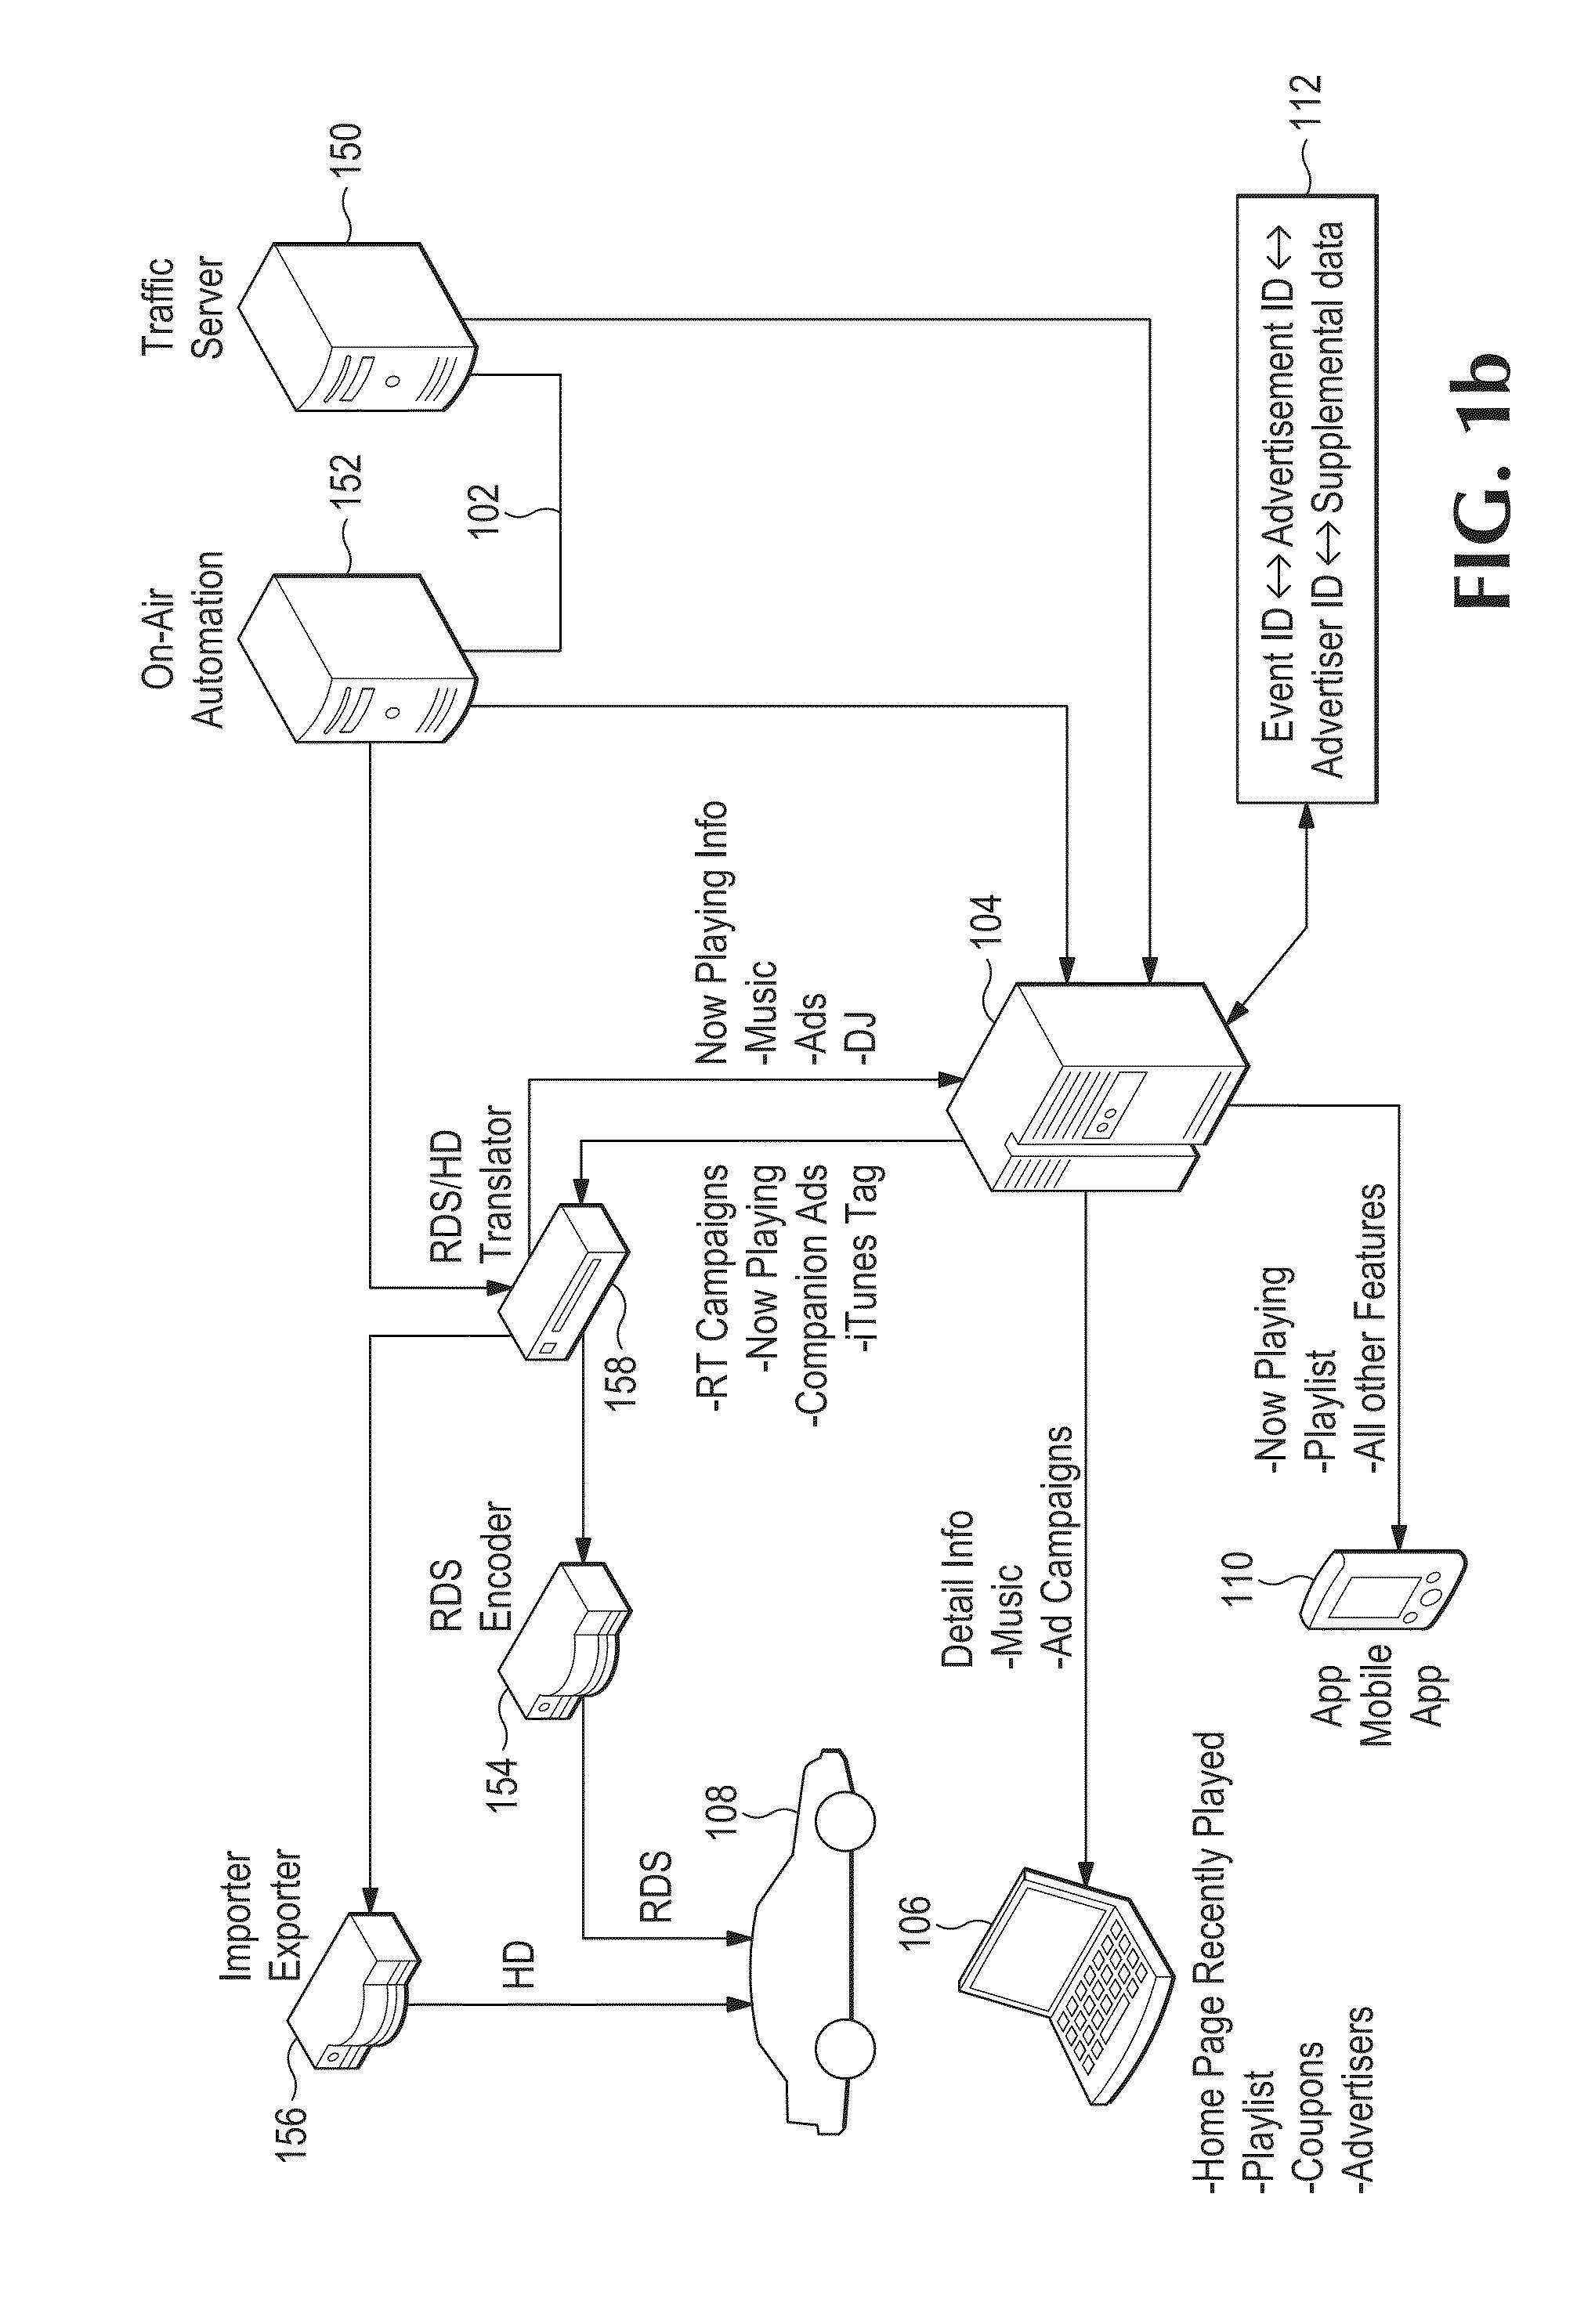 Real-time broadcast content synchronization database system